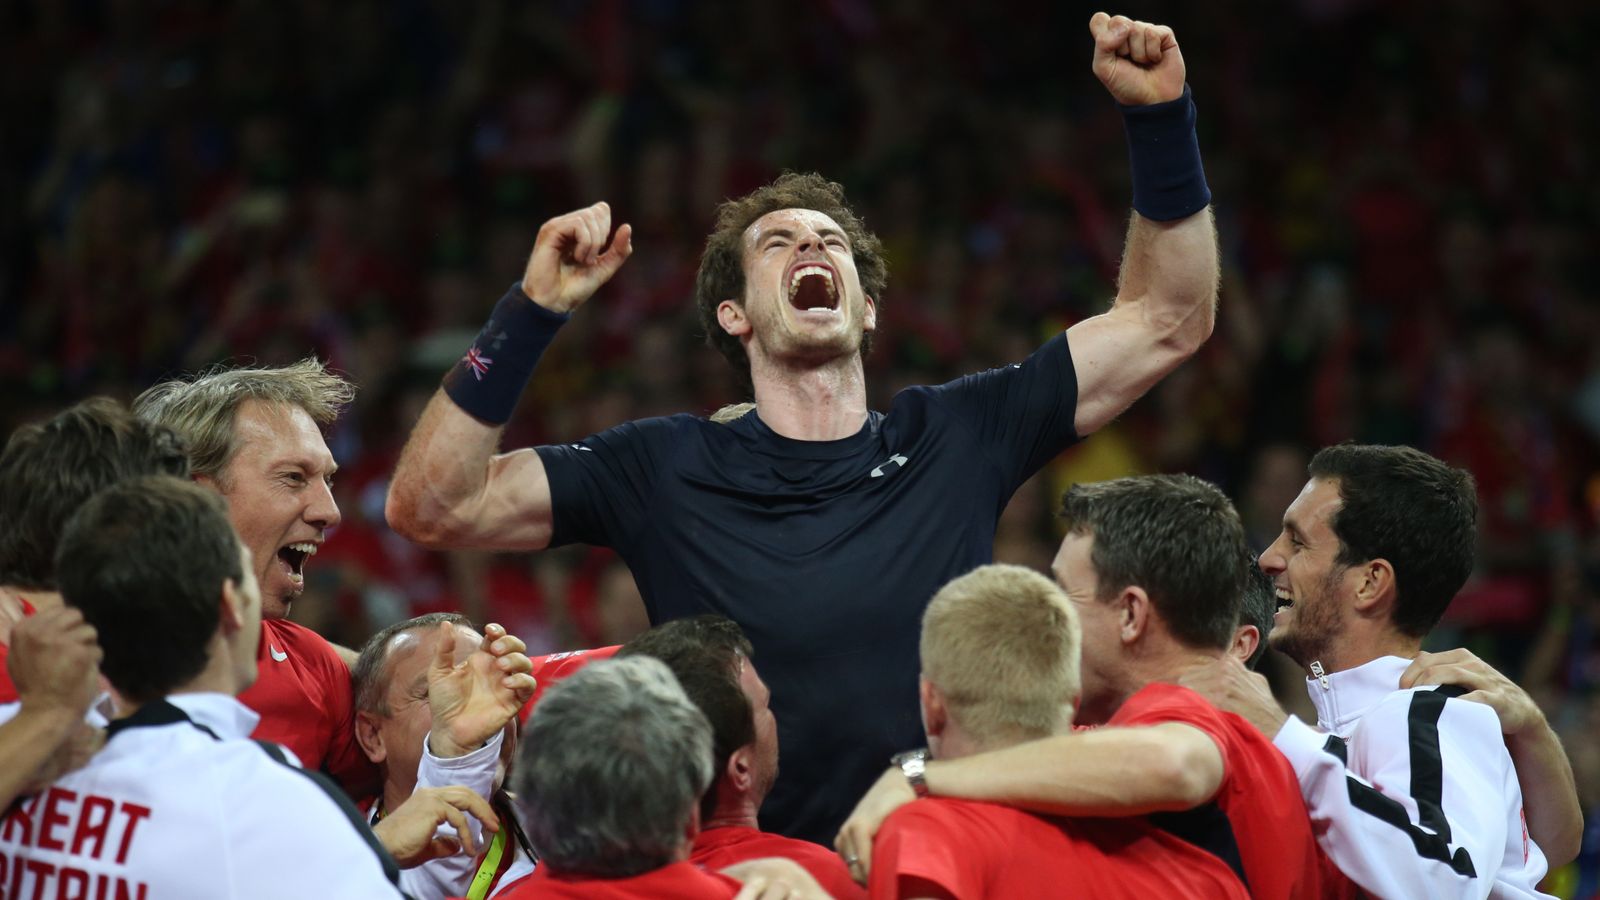 Davis Cup: Andy Murray included in Great Britain’s team for group stage of competition in mid-September